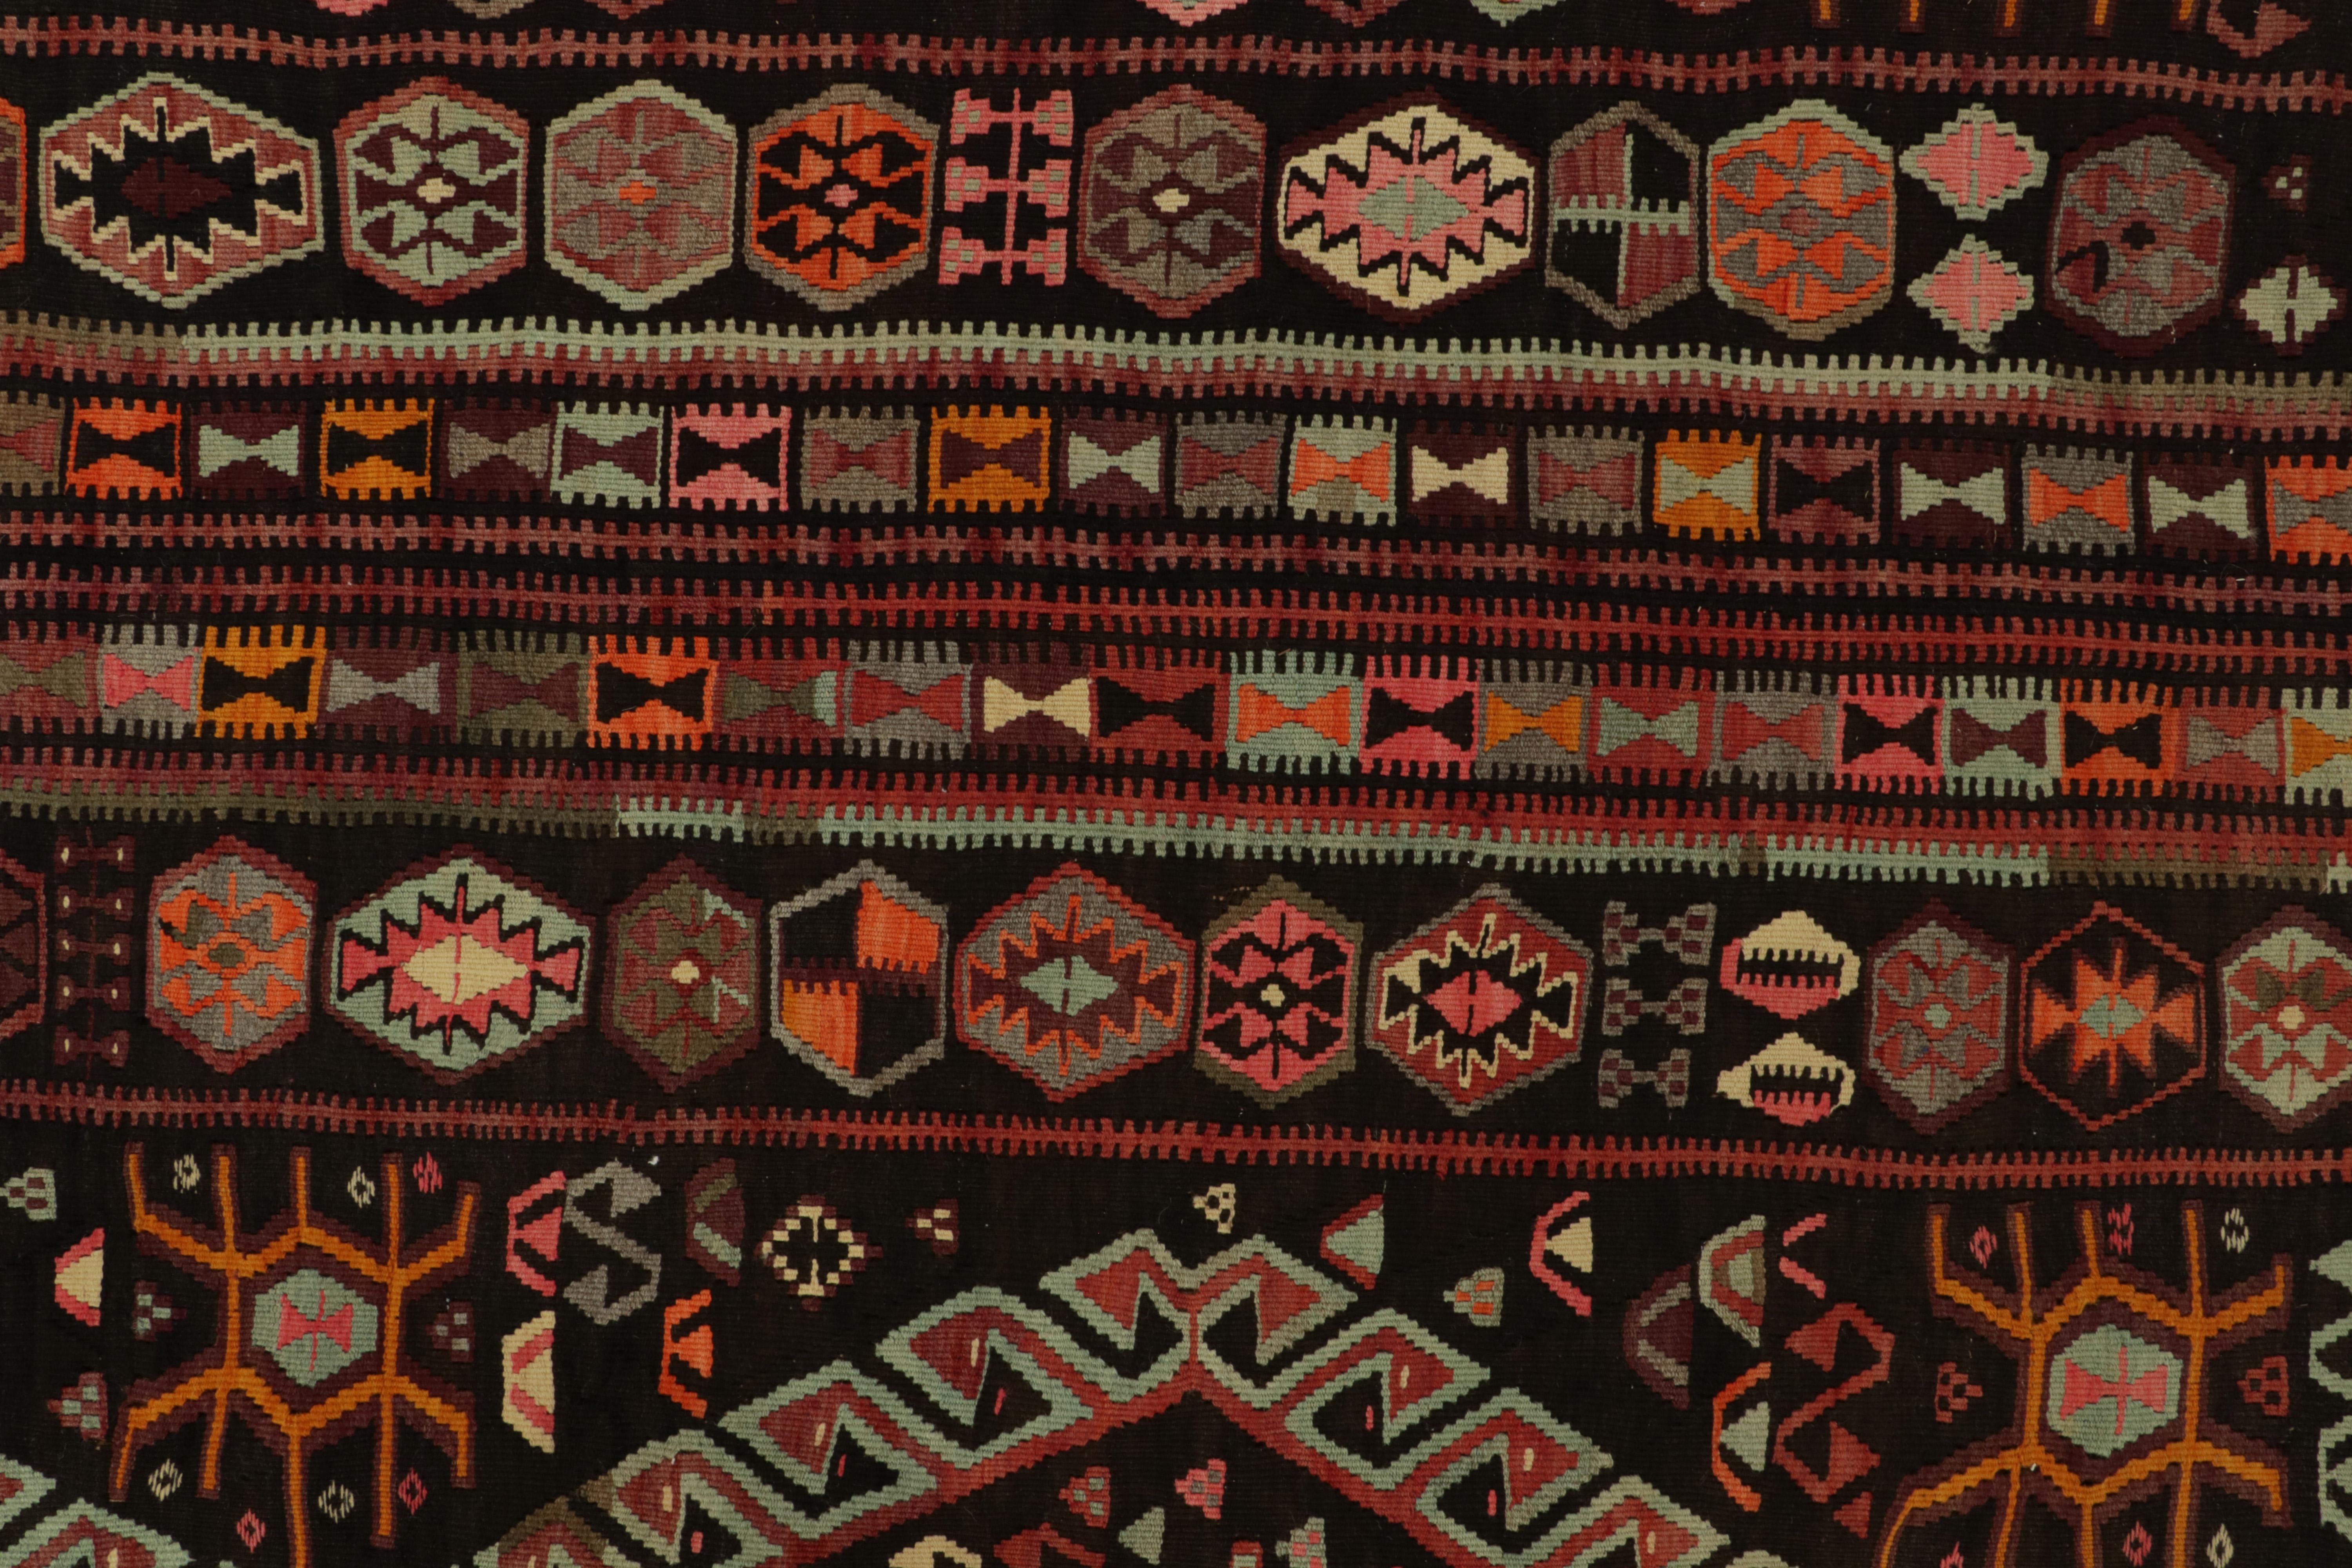 Rare Vintage Kilim Rug in Brown, Orange, Tribal Geometric Pattern by Rug & Kilim In Good Condition For Sale In Long Island City, NY